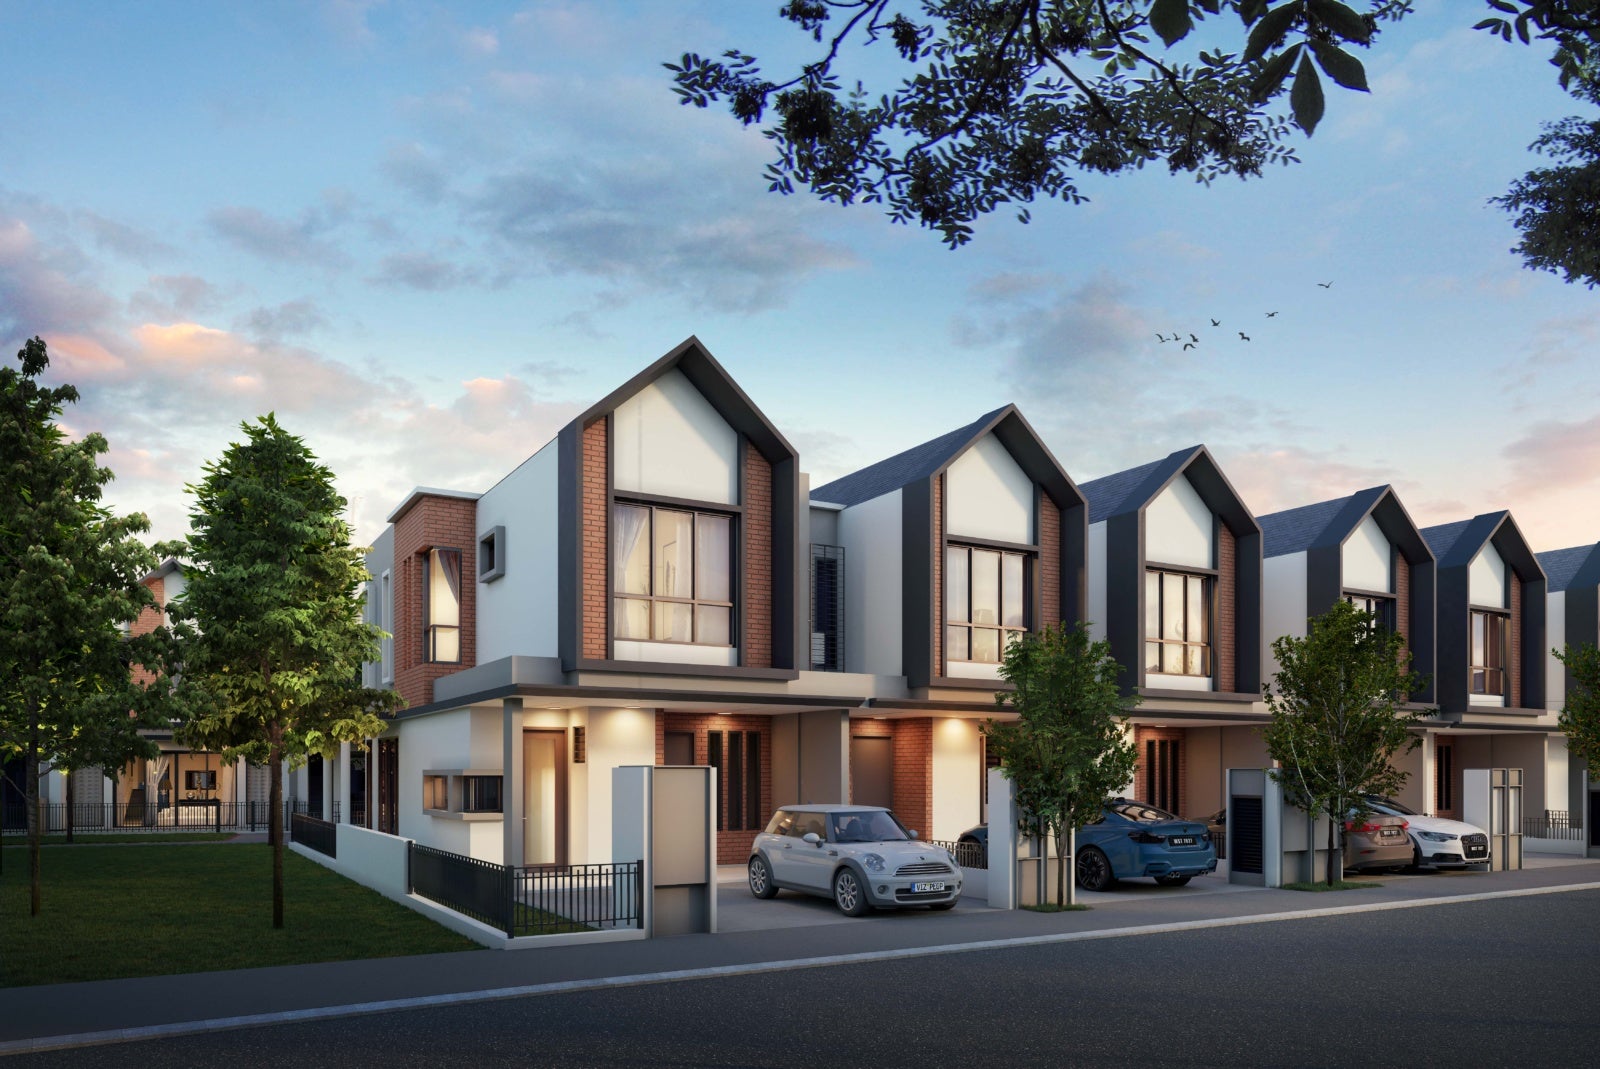 [TEST] These New Klang Valley 'Smart Homes' Are So Eco-Friendly, They Can Help You Save Up to 50% on Electricity Bills - WORLD OF BUZZ 7